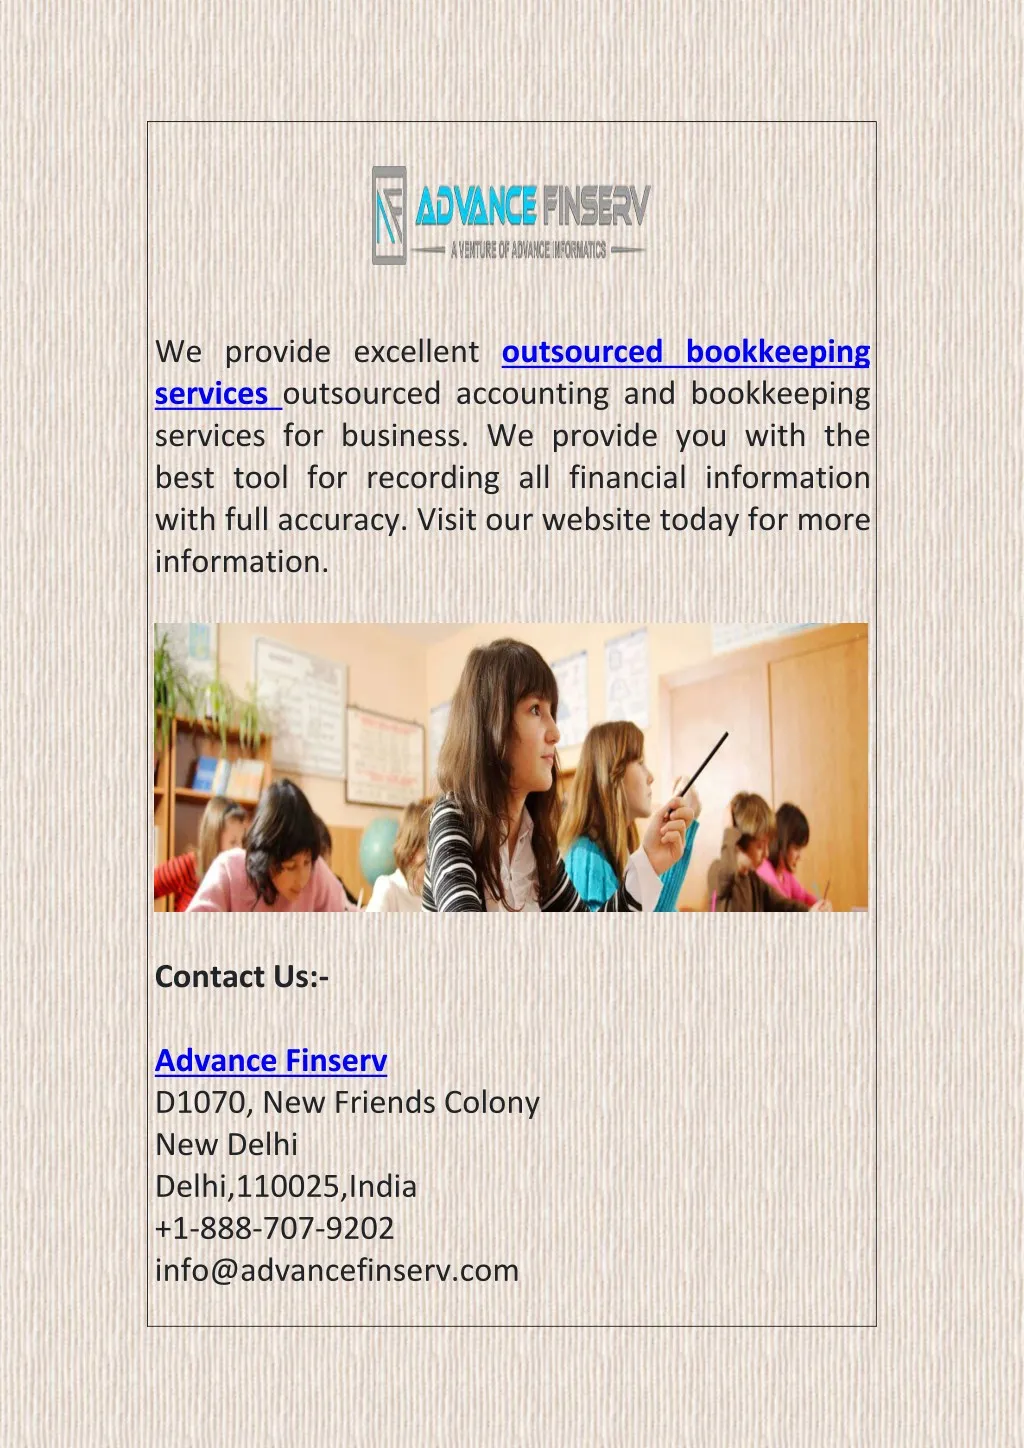 we provide excellent outsourced bookkeeping